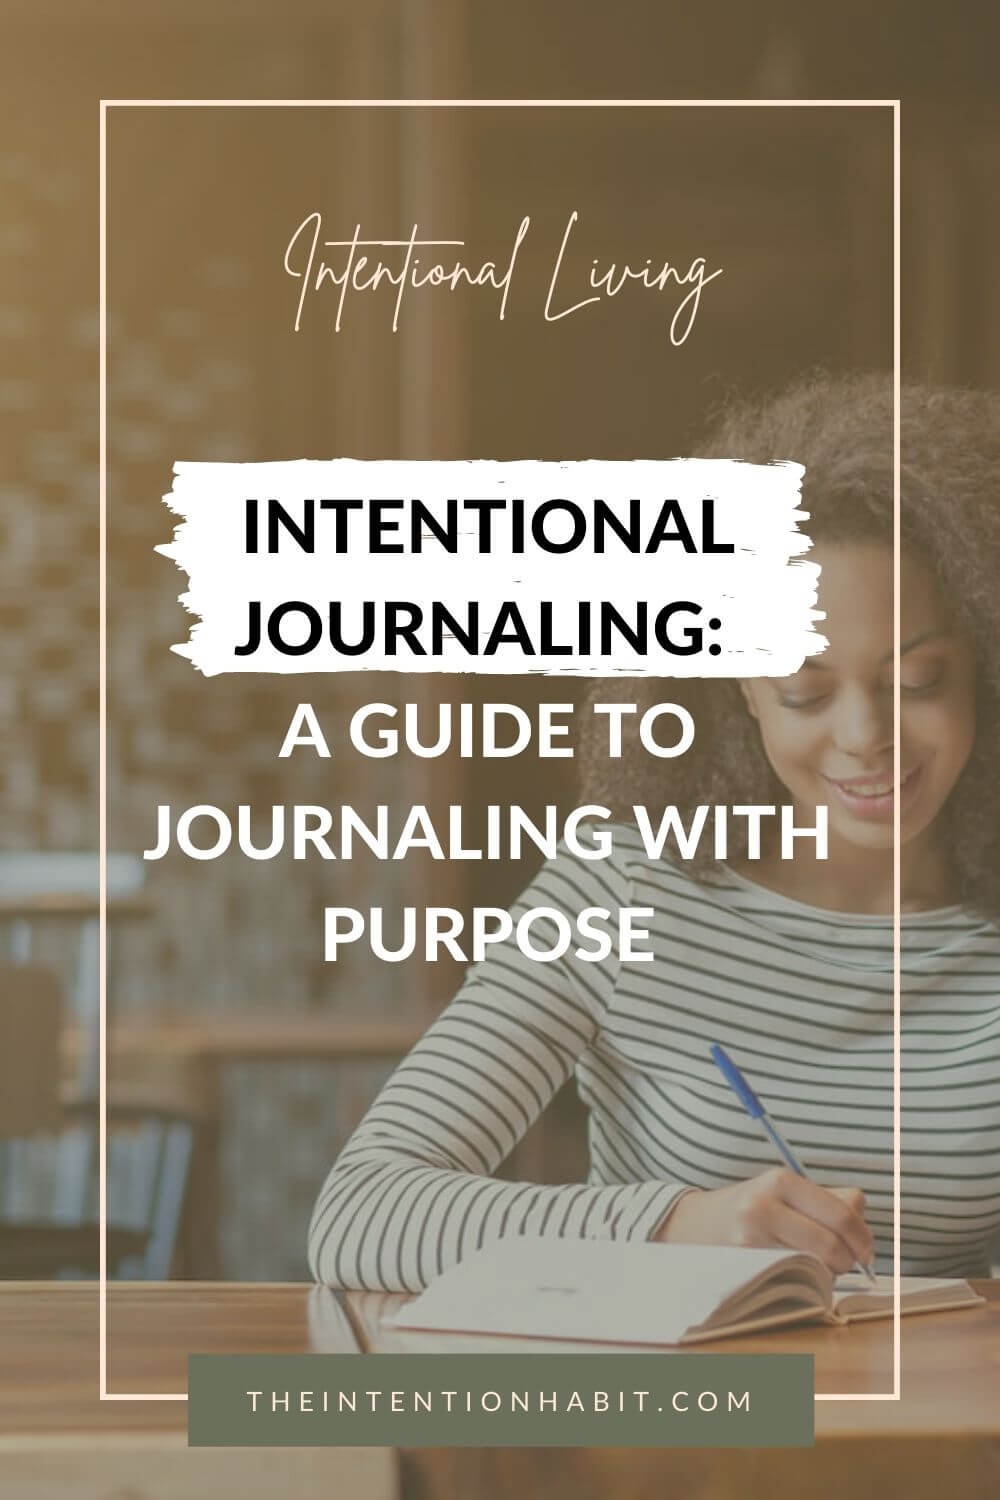 Intentional living - Intentional Journaling: A Guide to journaling with purpose